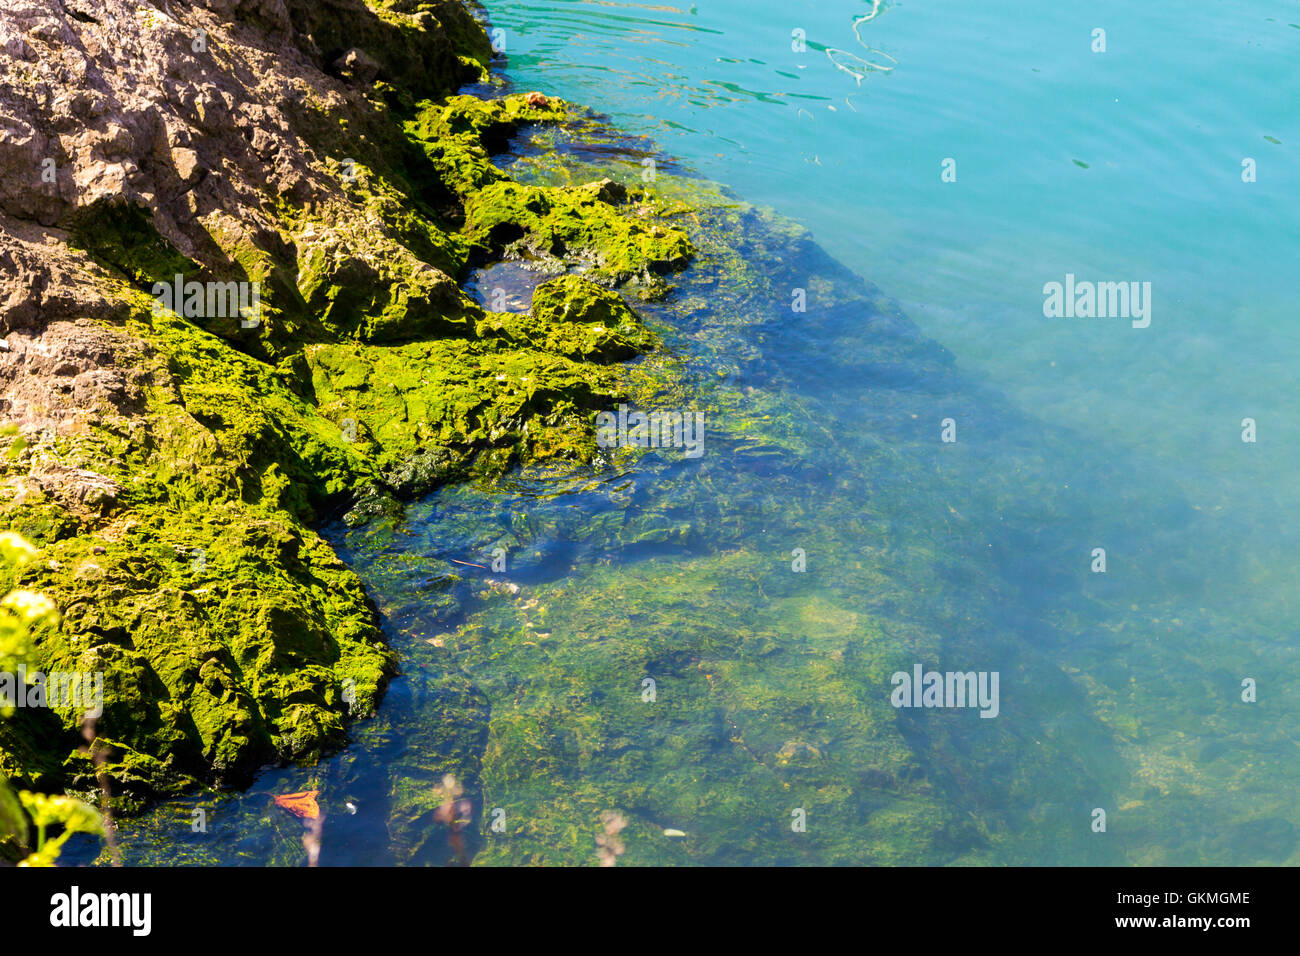 Crystal blue waters along rocks with seaweed Stock Photo